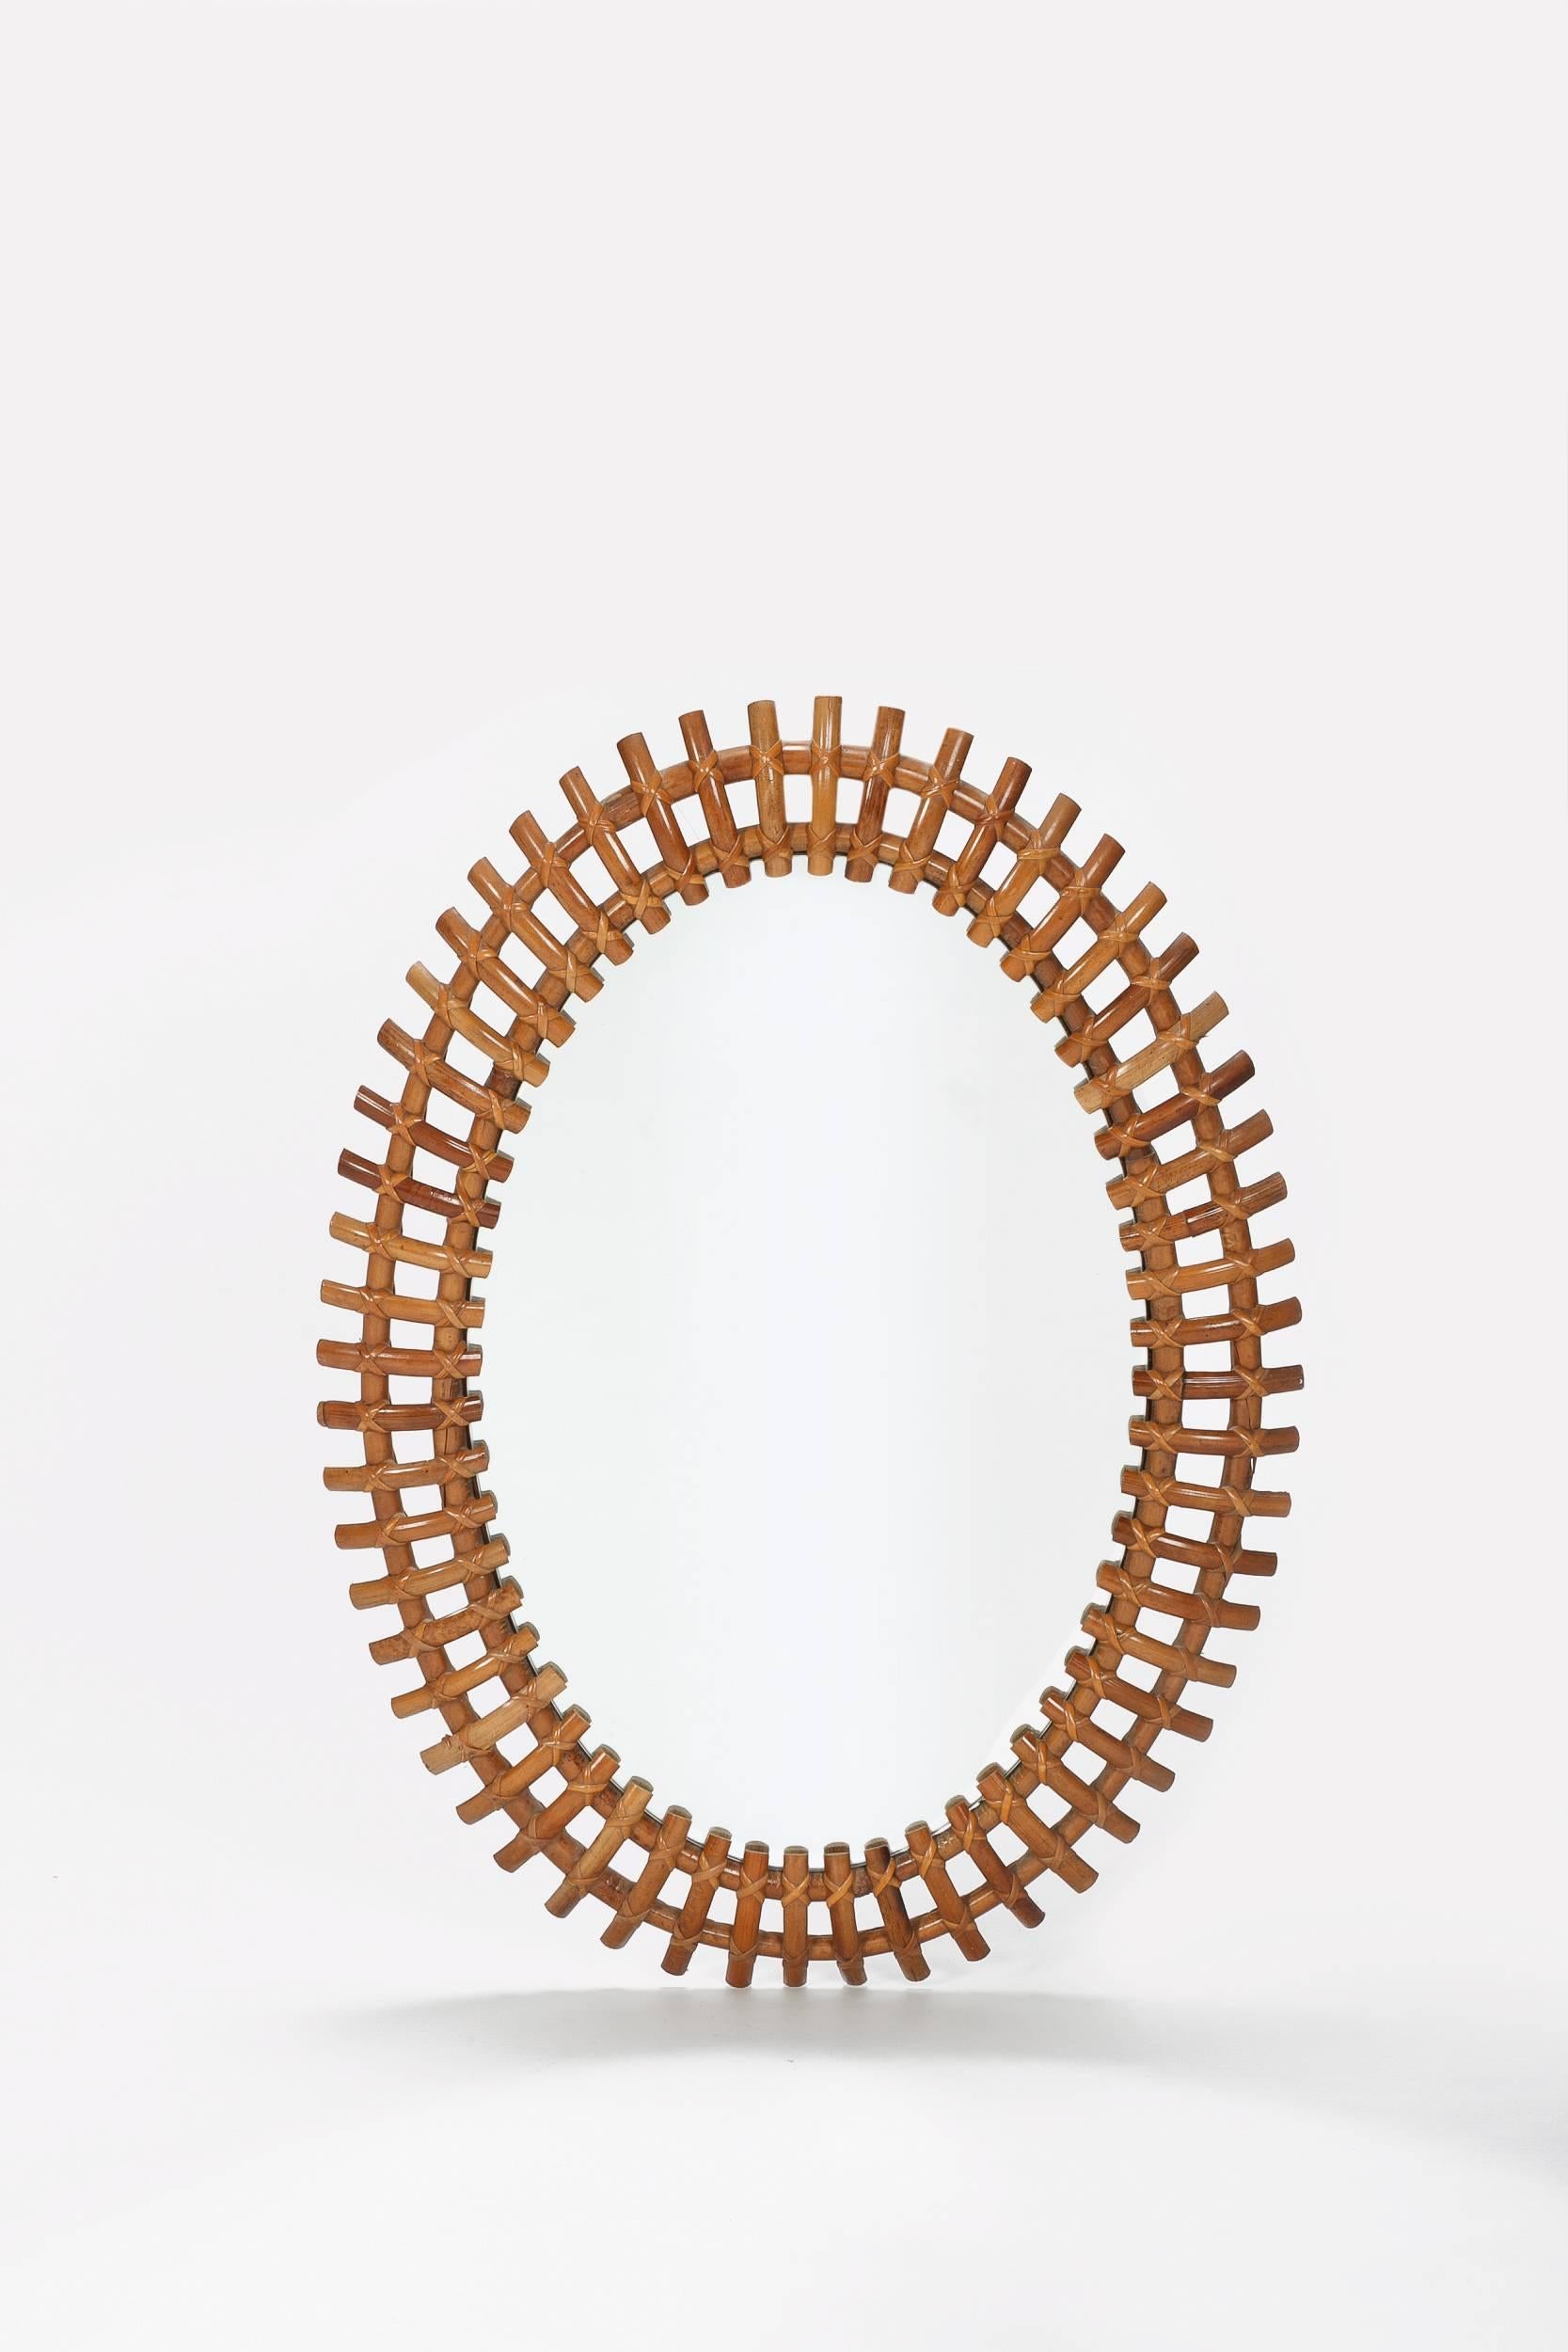 Large Italian bamboo sunburst mirror, manufactured in the 1950s. High-end craftsmanship, original mirrored glass, oval shape.